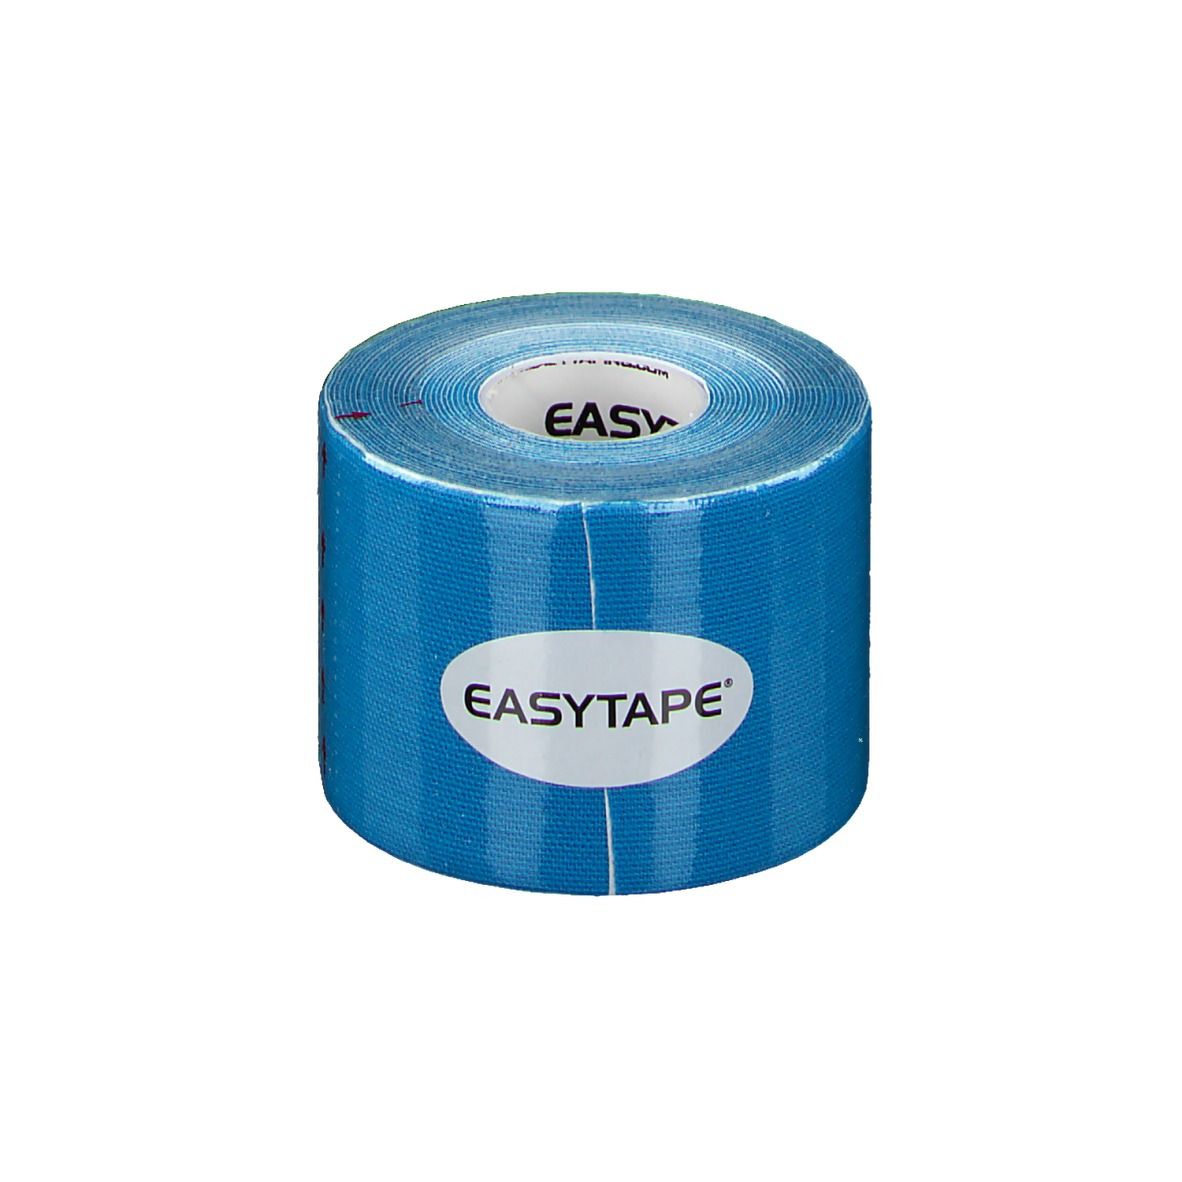 Easytape® Therapeutic Tape bleu clair